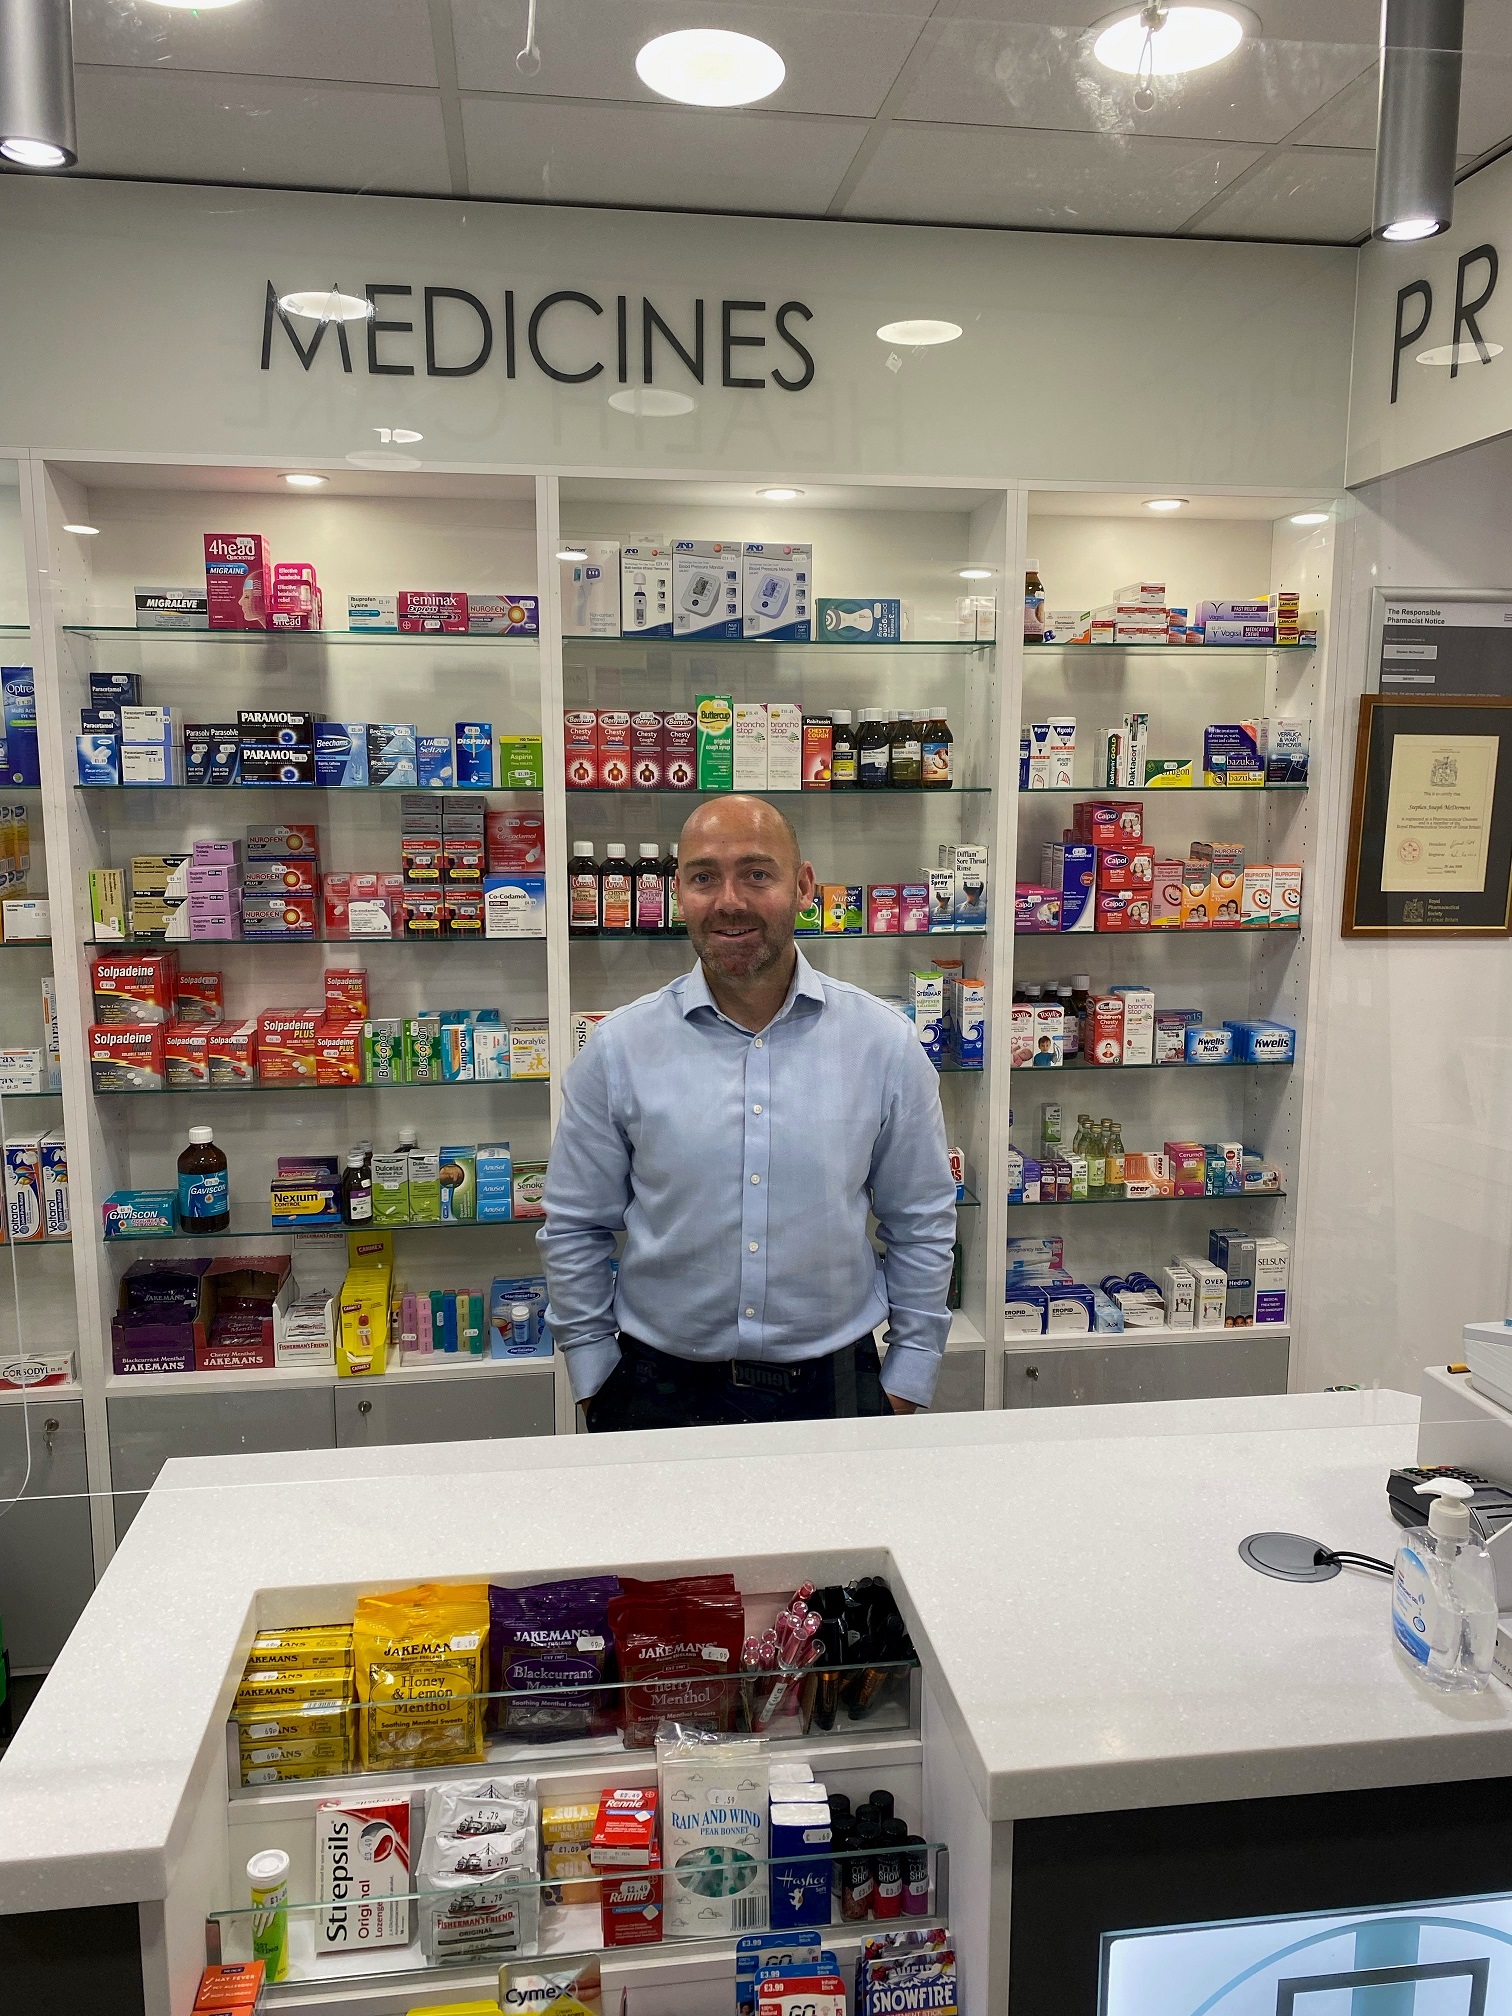 G&S Investments acquires Lanarkshire pharmacy with HSBC UK funding